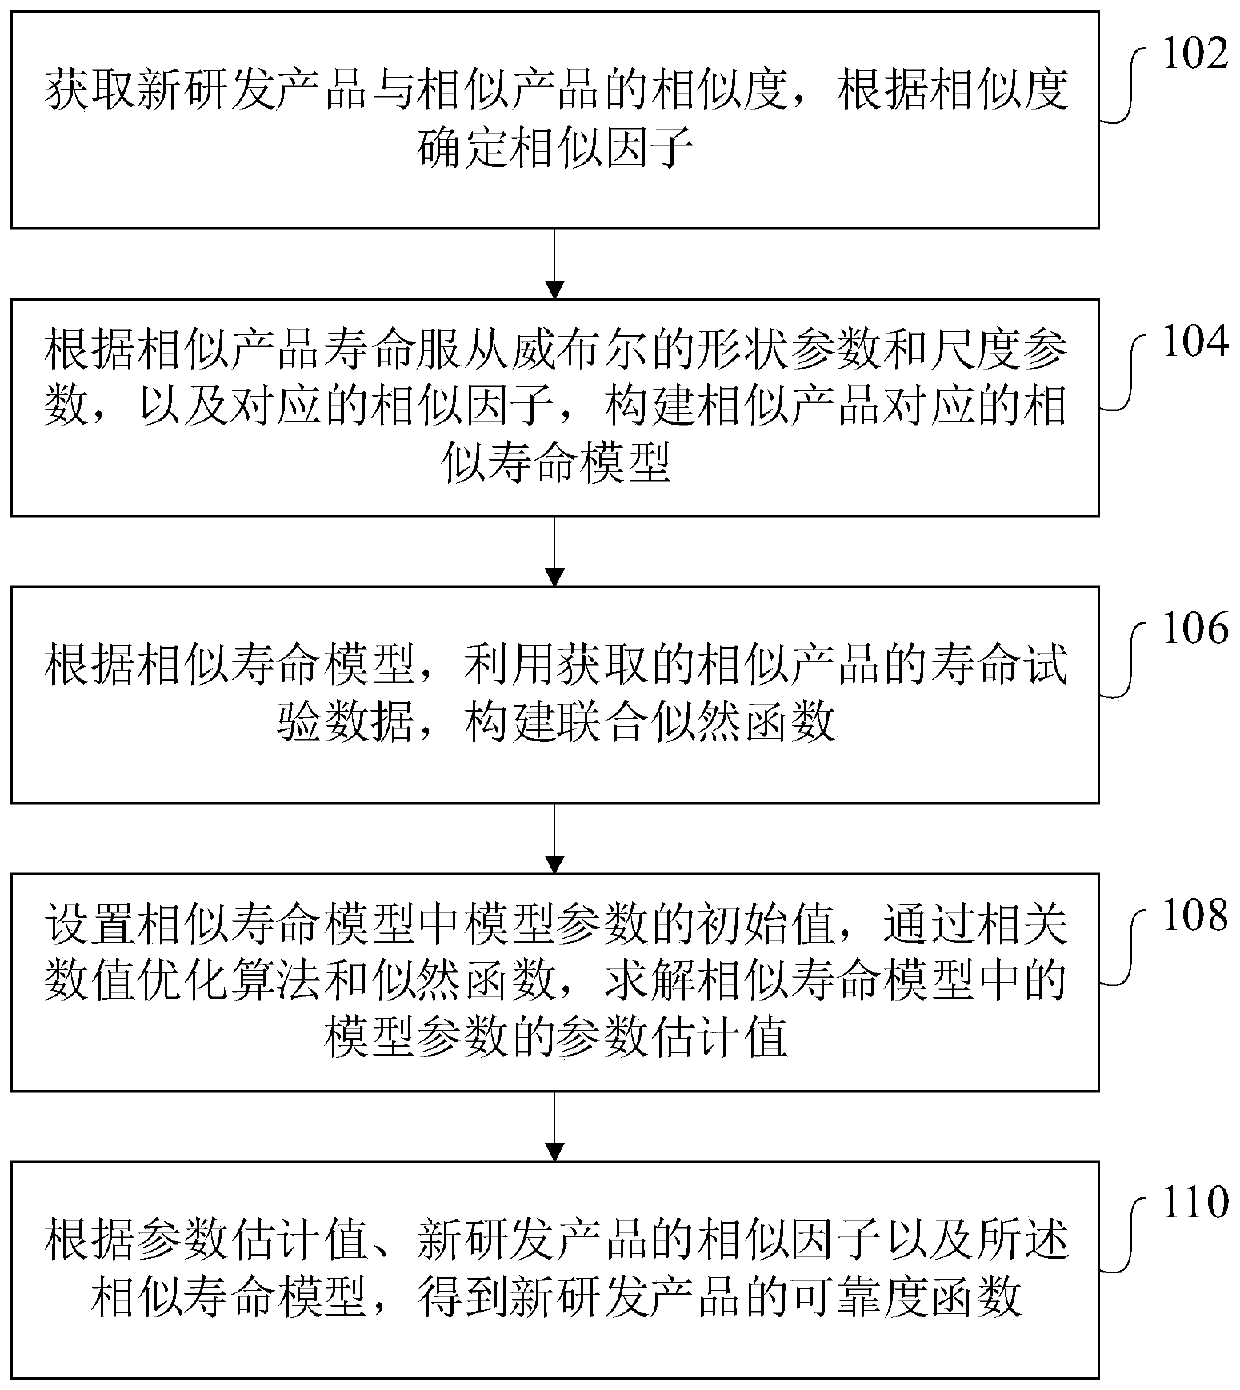 Complex product reliability evaluation method based on similar life model and similar life